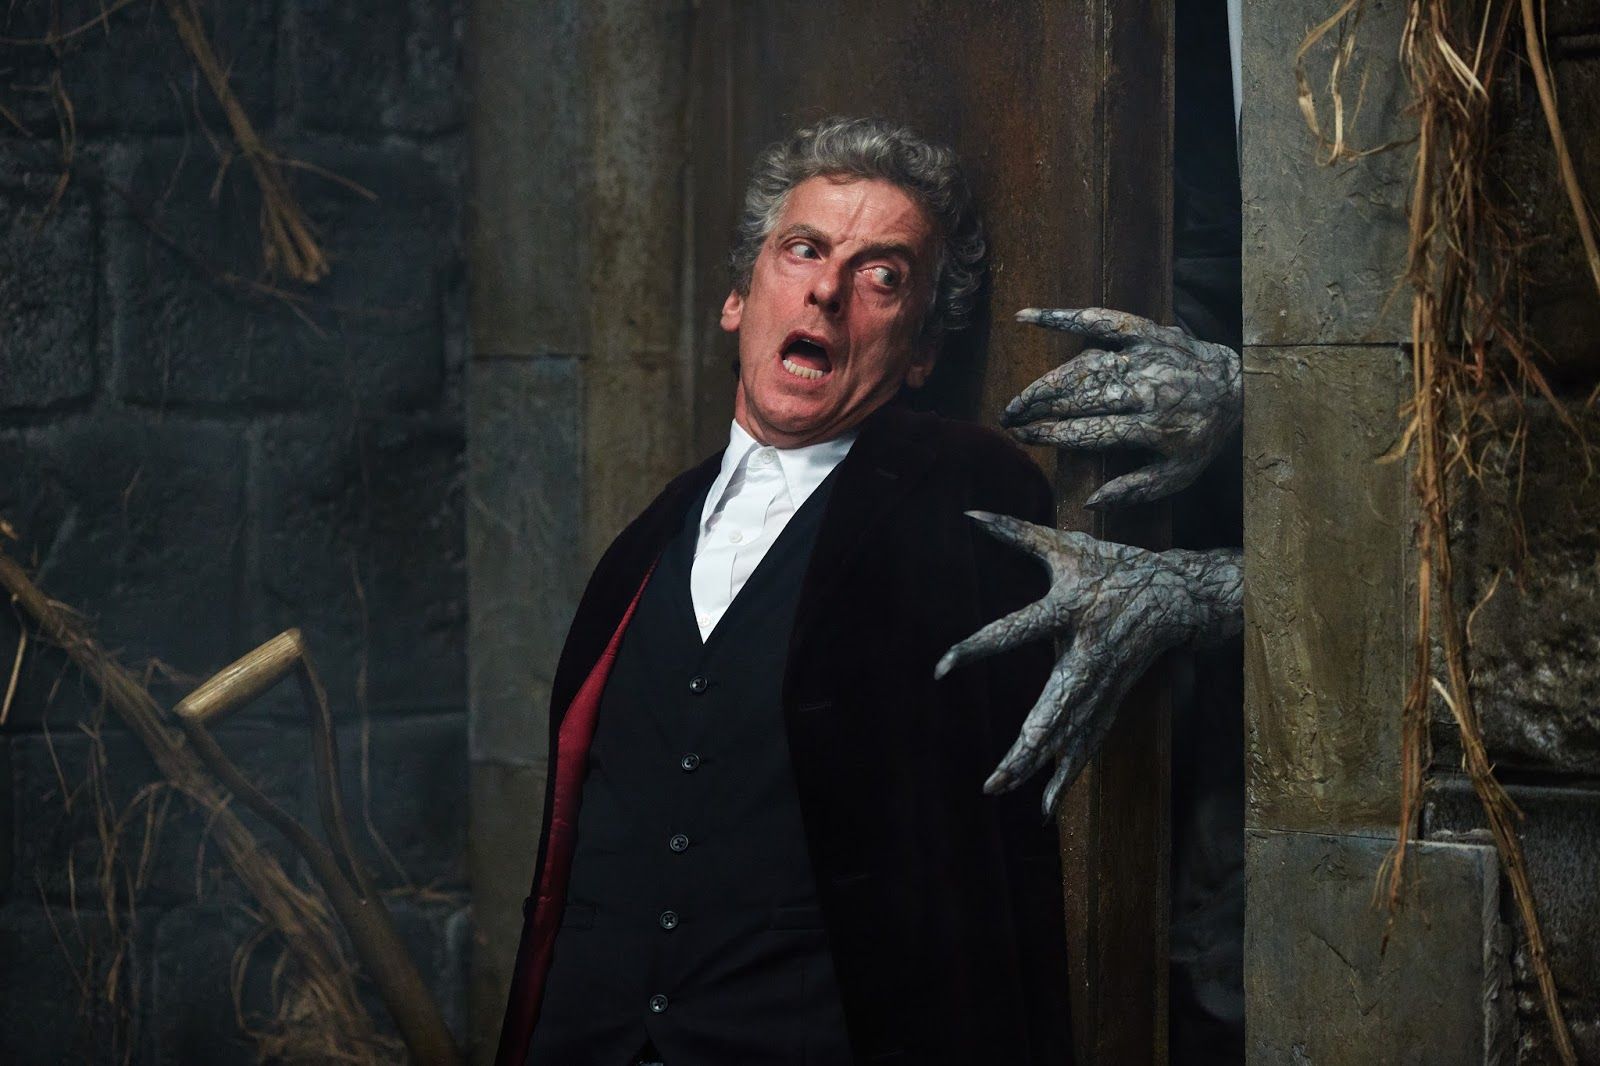 scariest doctor who episodes